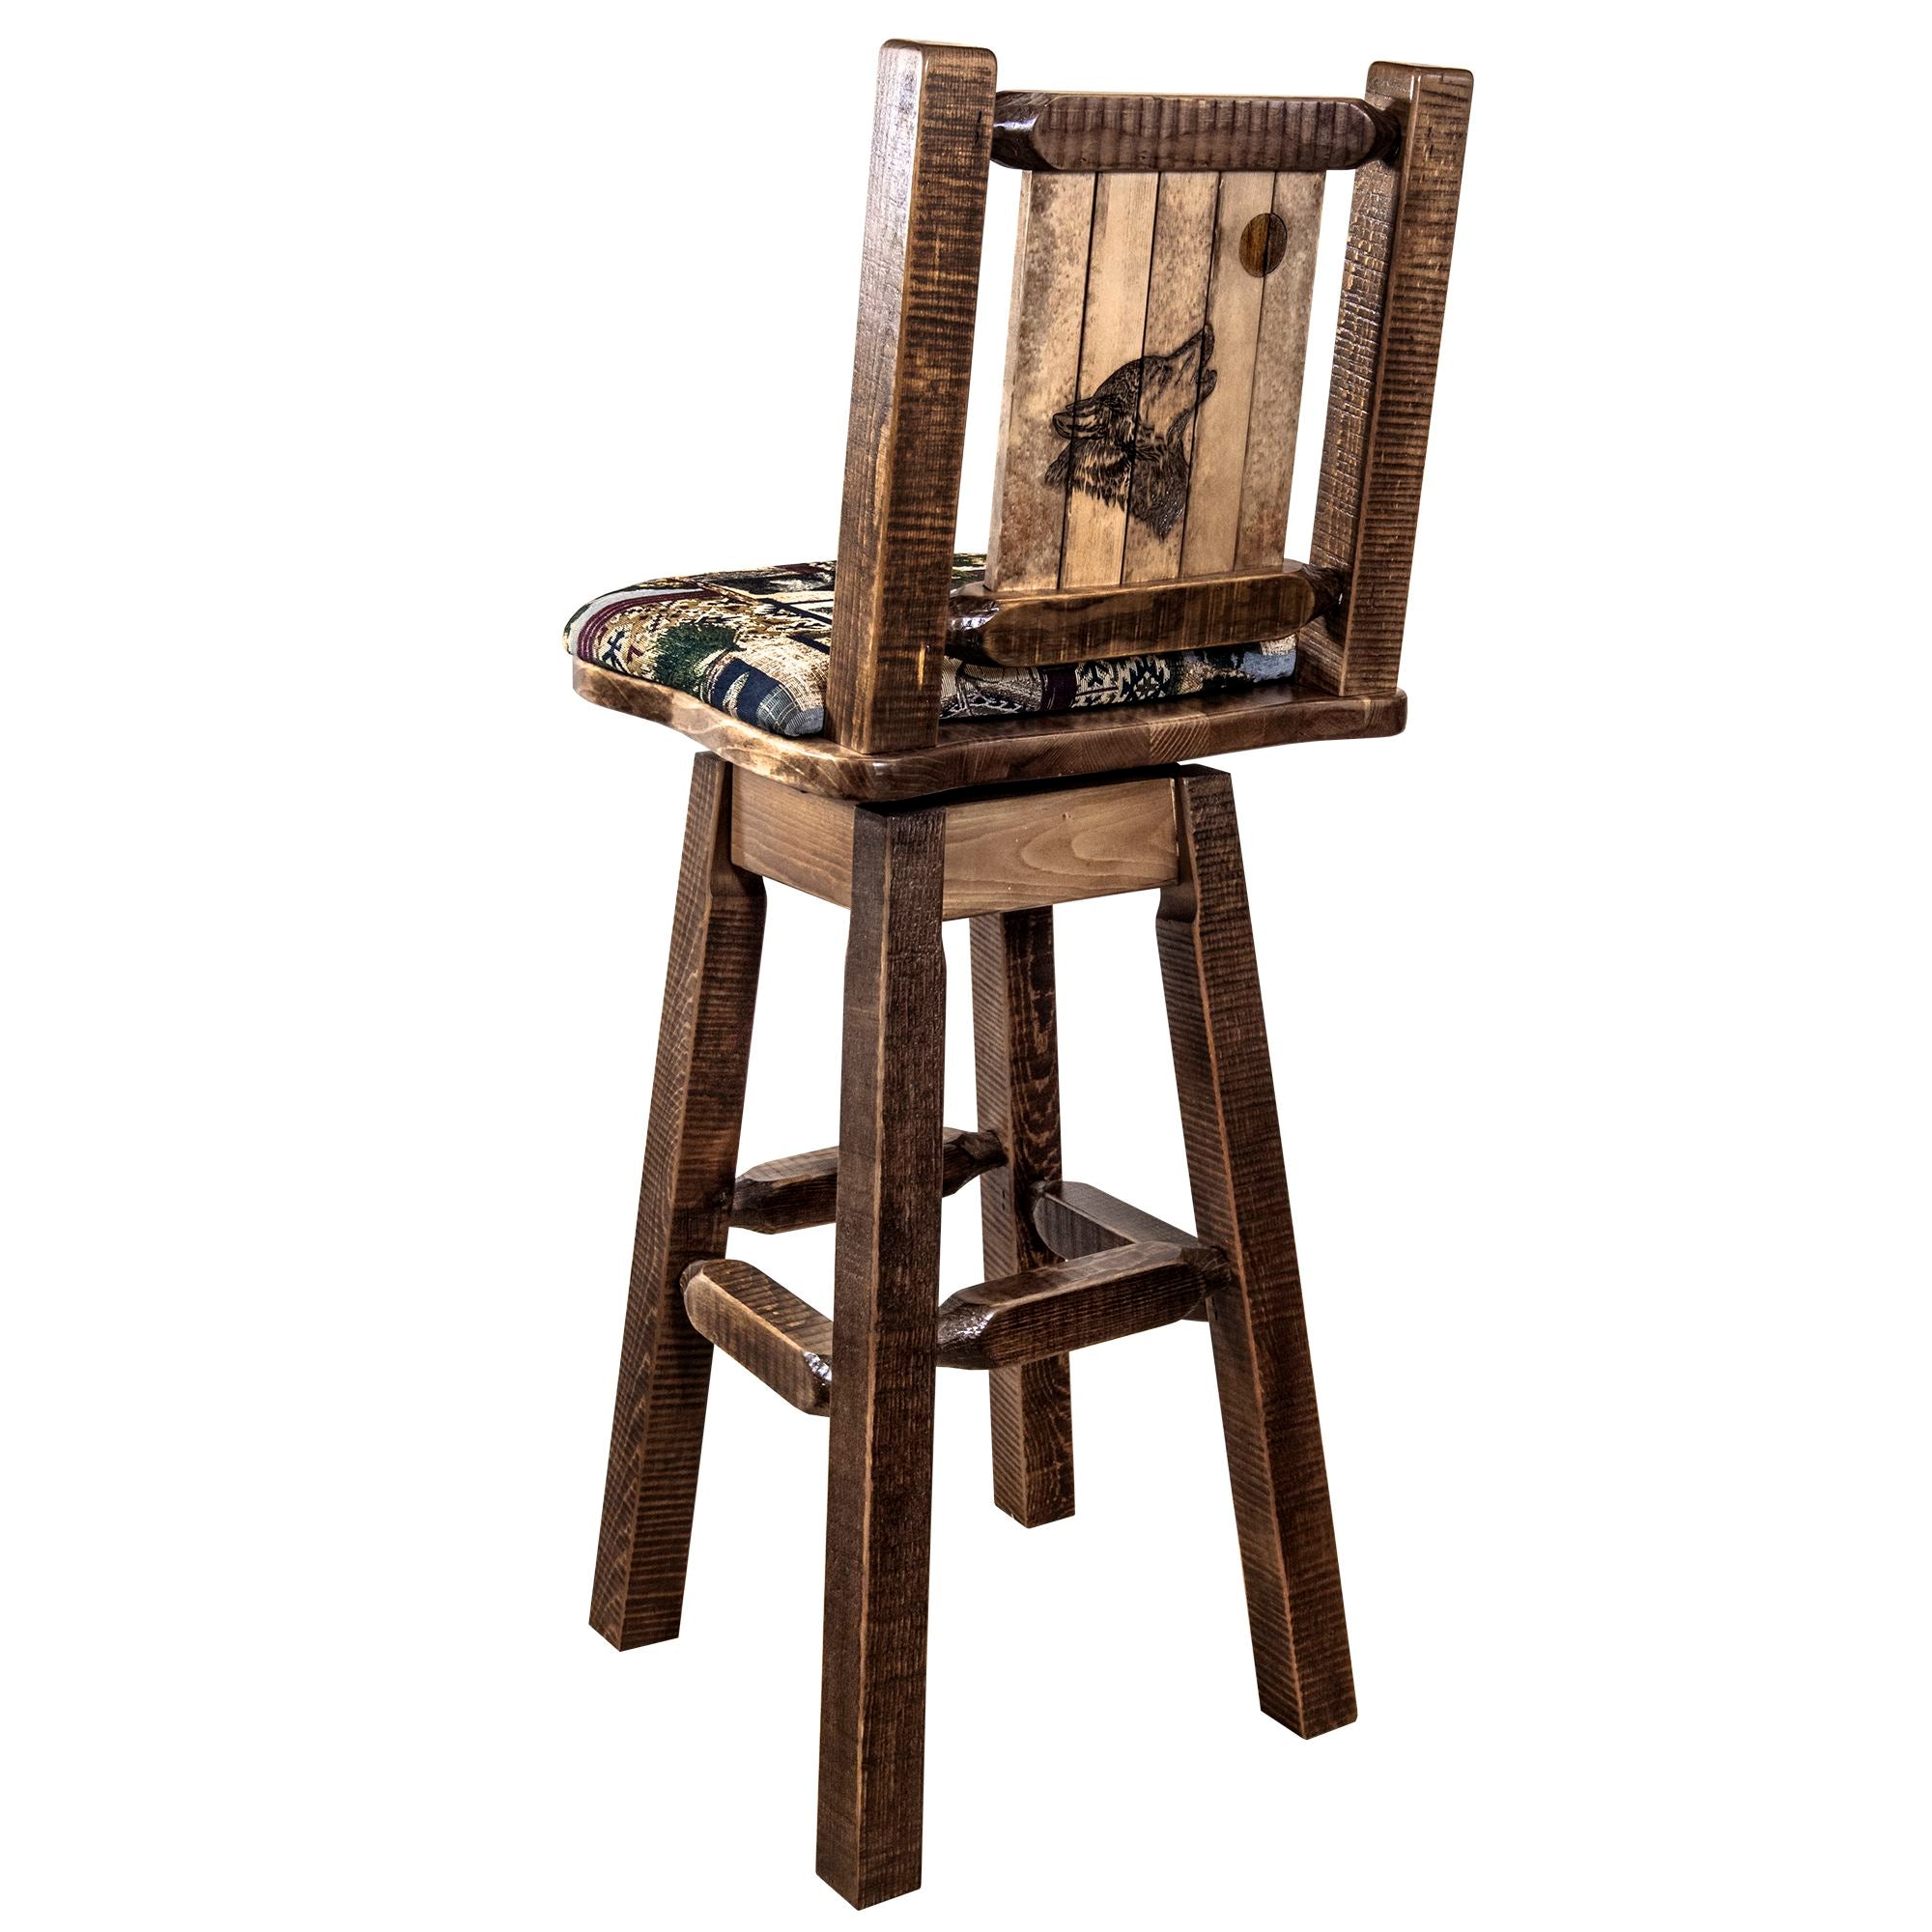 montana woodworks homestead collection barstool with back and swivel woodland pattern upholstery and laser engraved wolf design mwhcbswsnrslwolf